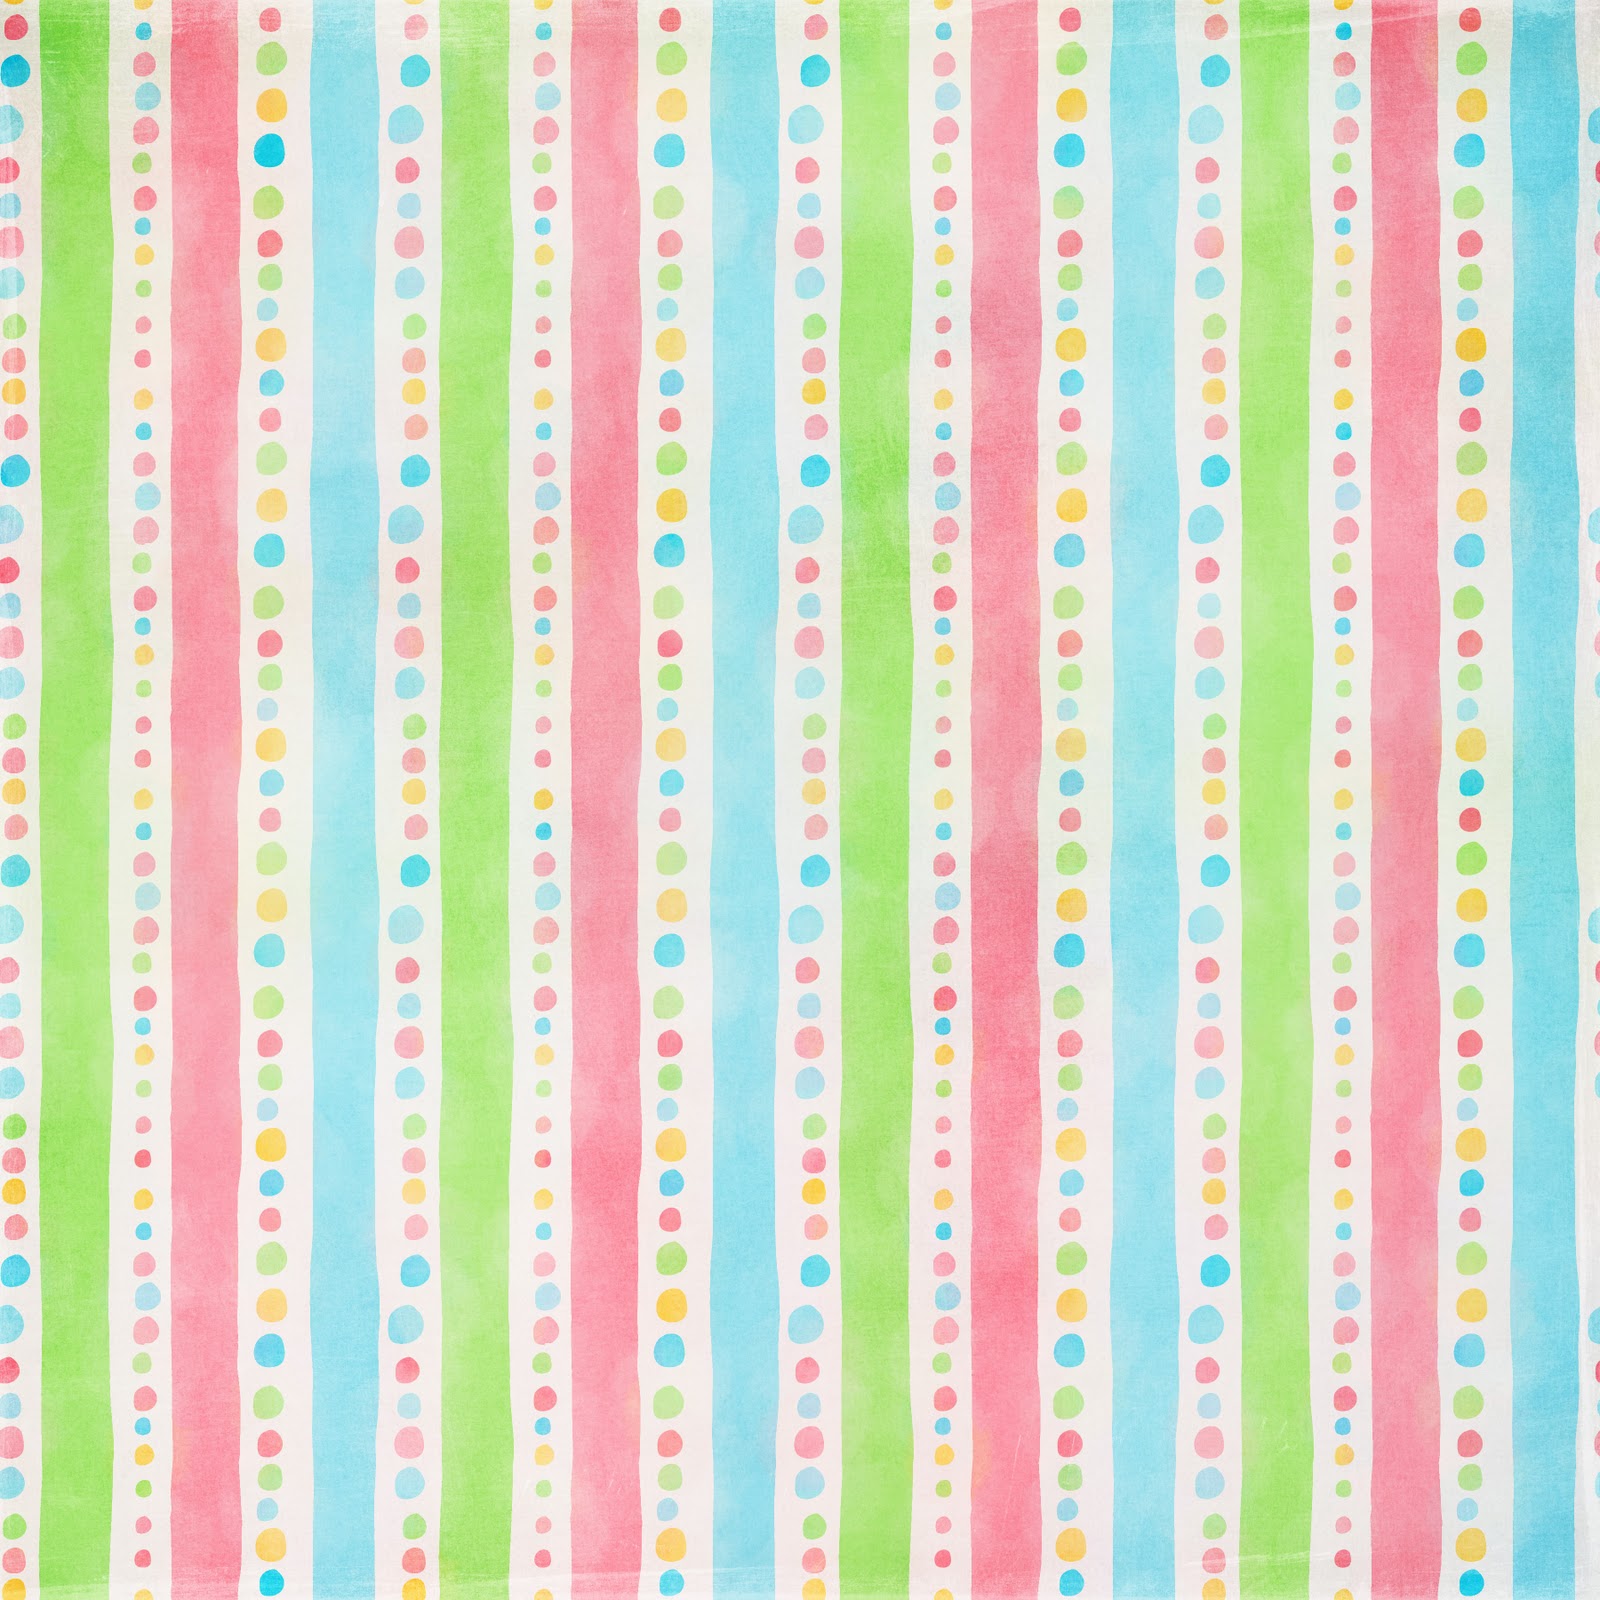 pattern-templates-for-scrapbooking-free-patterns